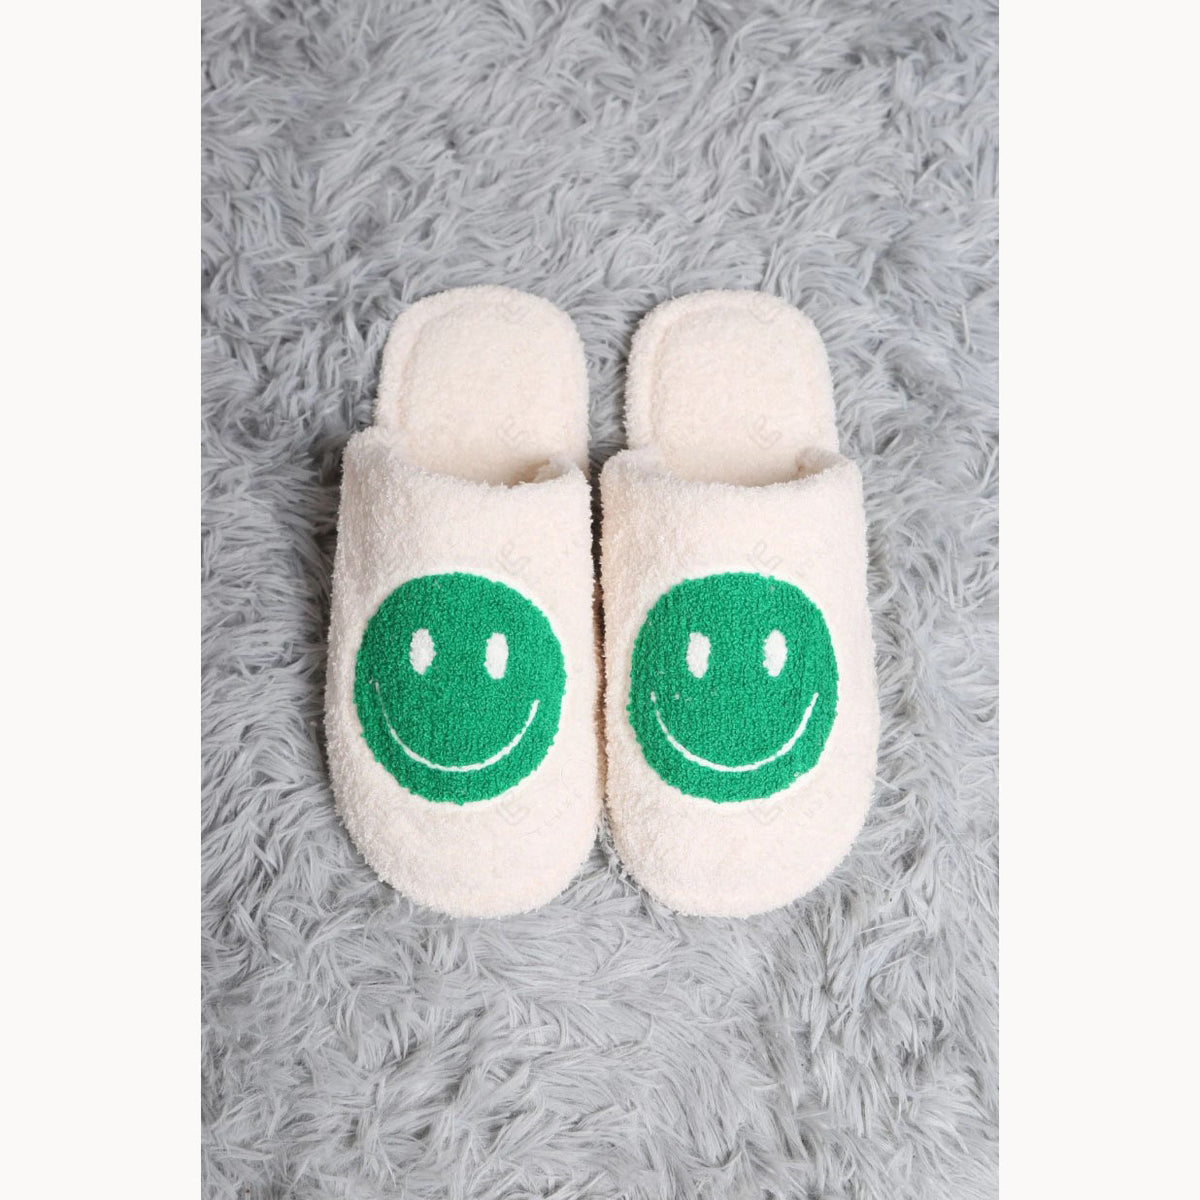 Room Slippers [Smiley]